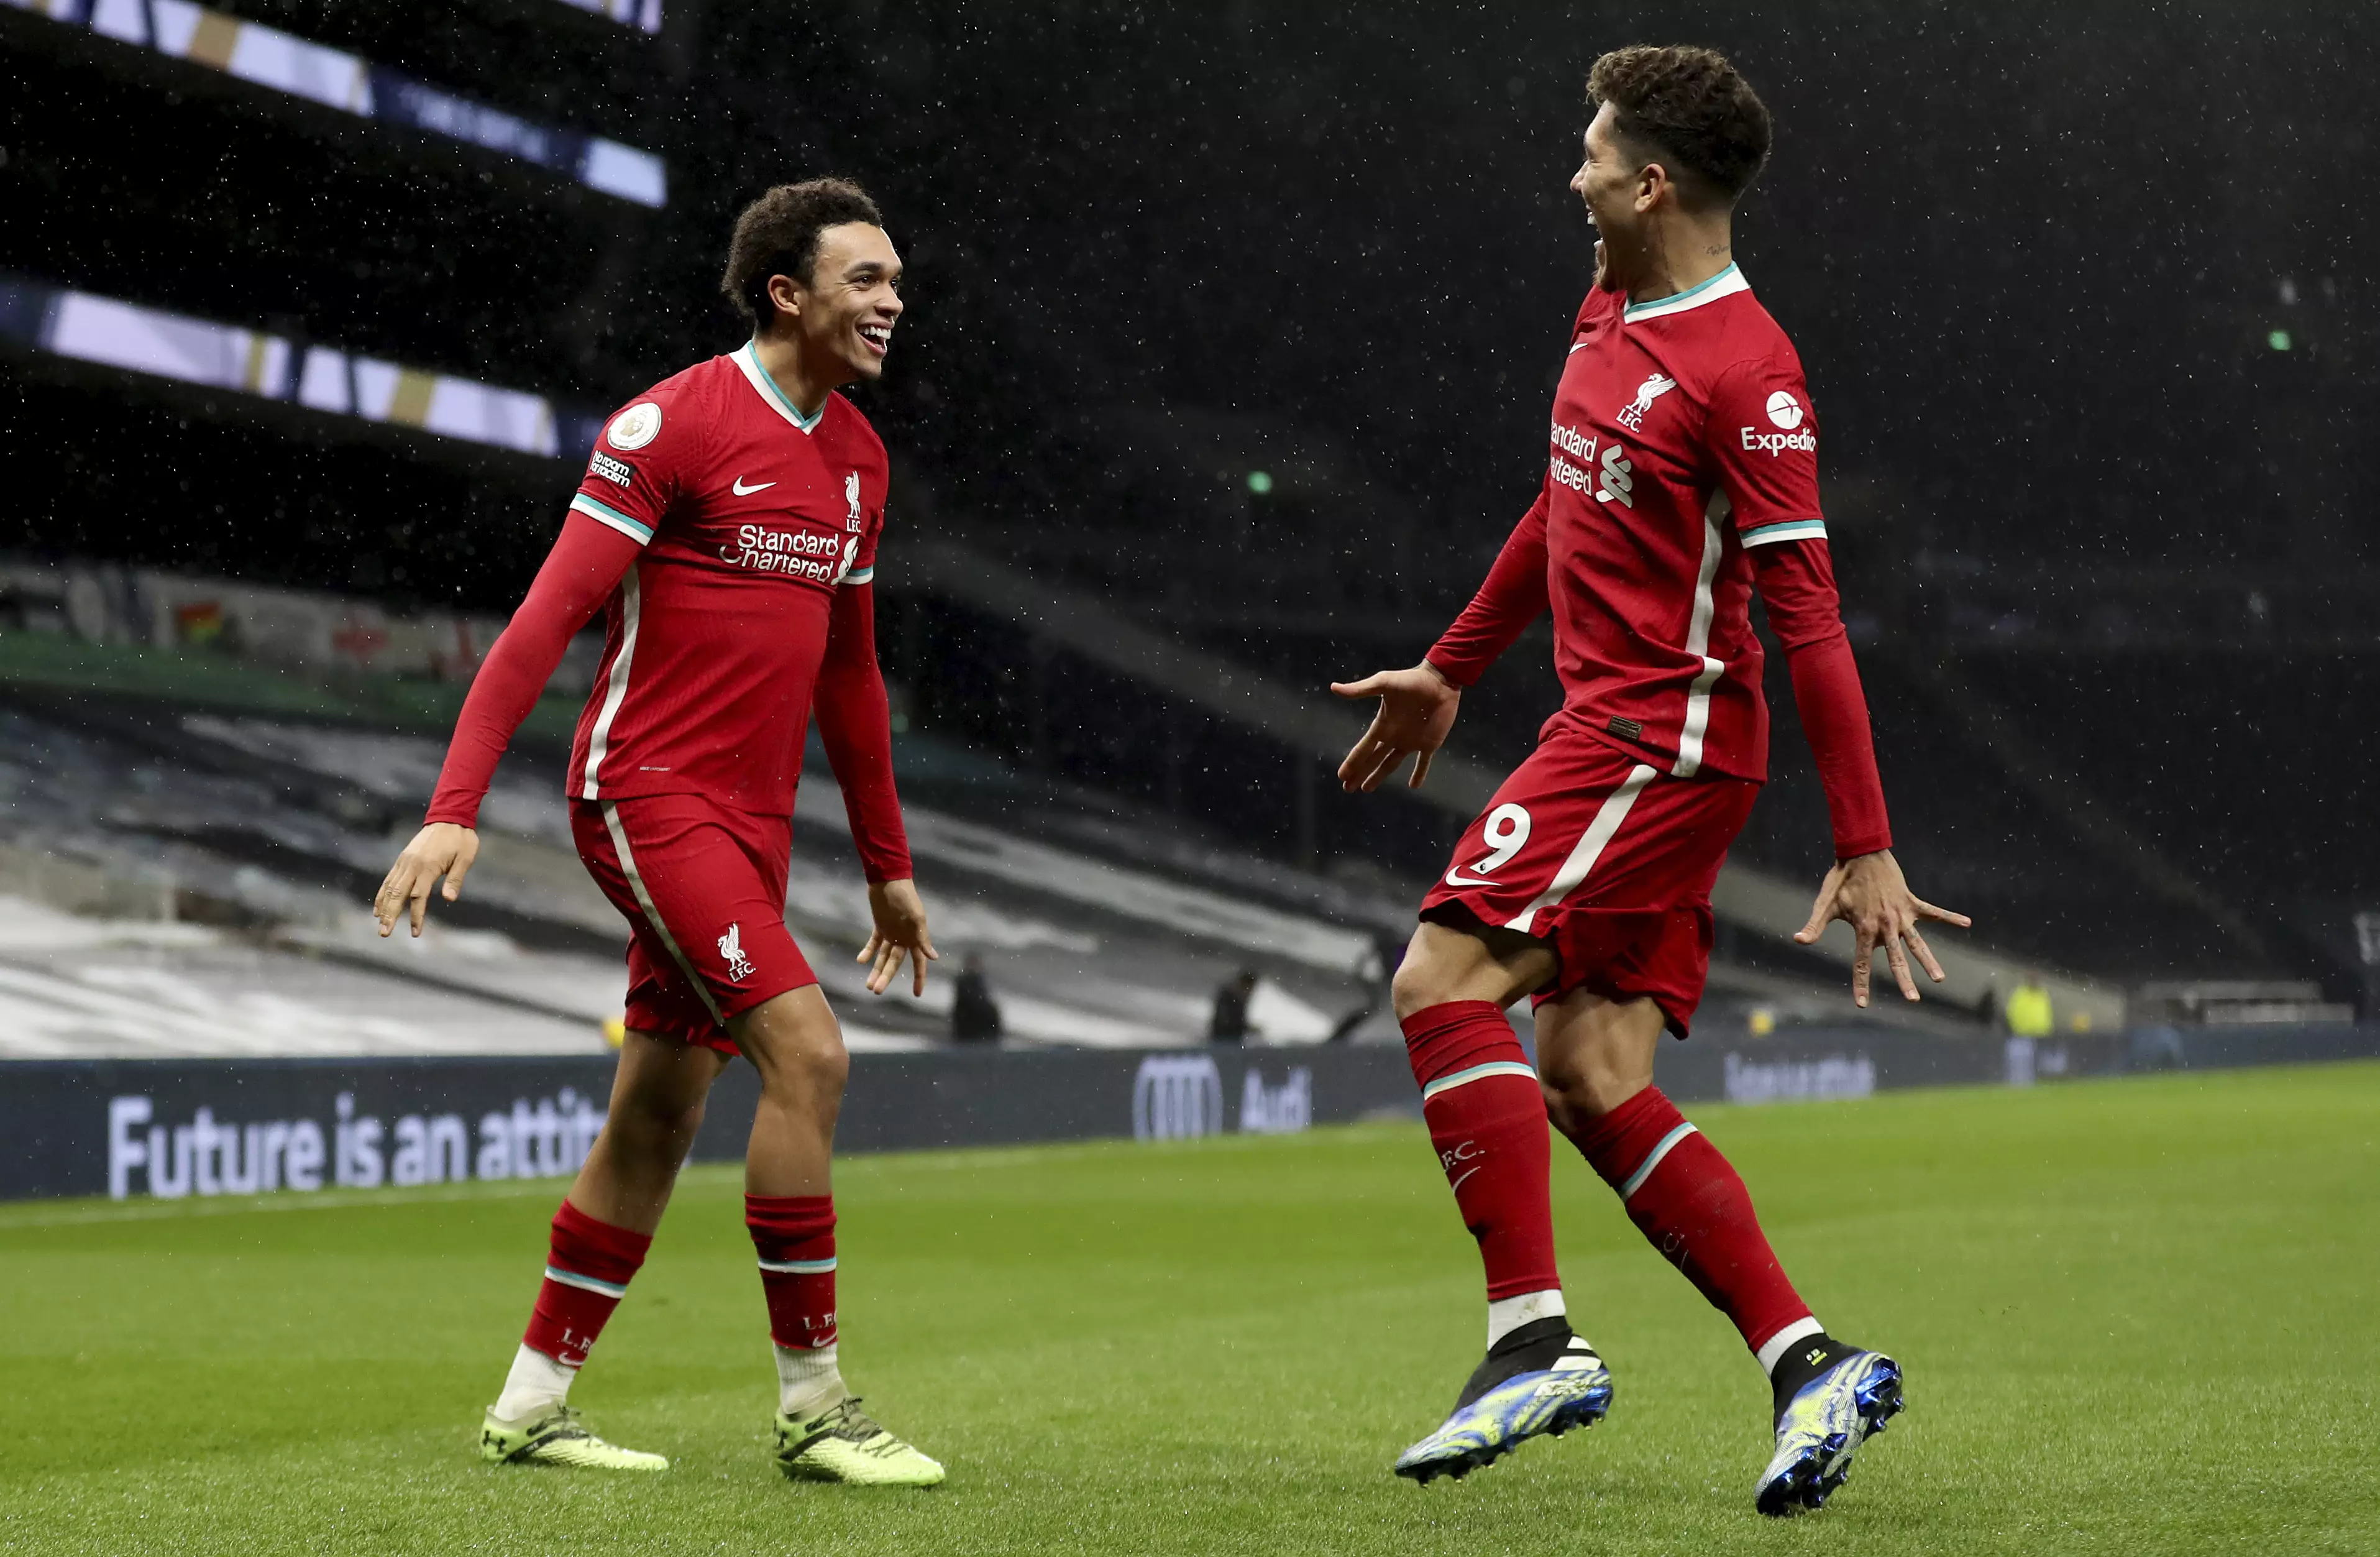 Trent Alexander-Arnold and Roberto Firmino celebrate their side's second goal. (Image